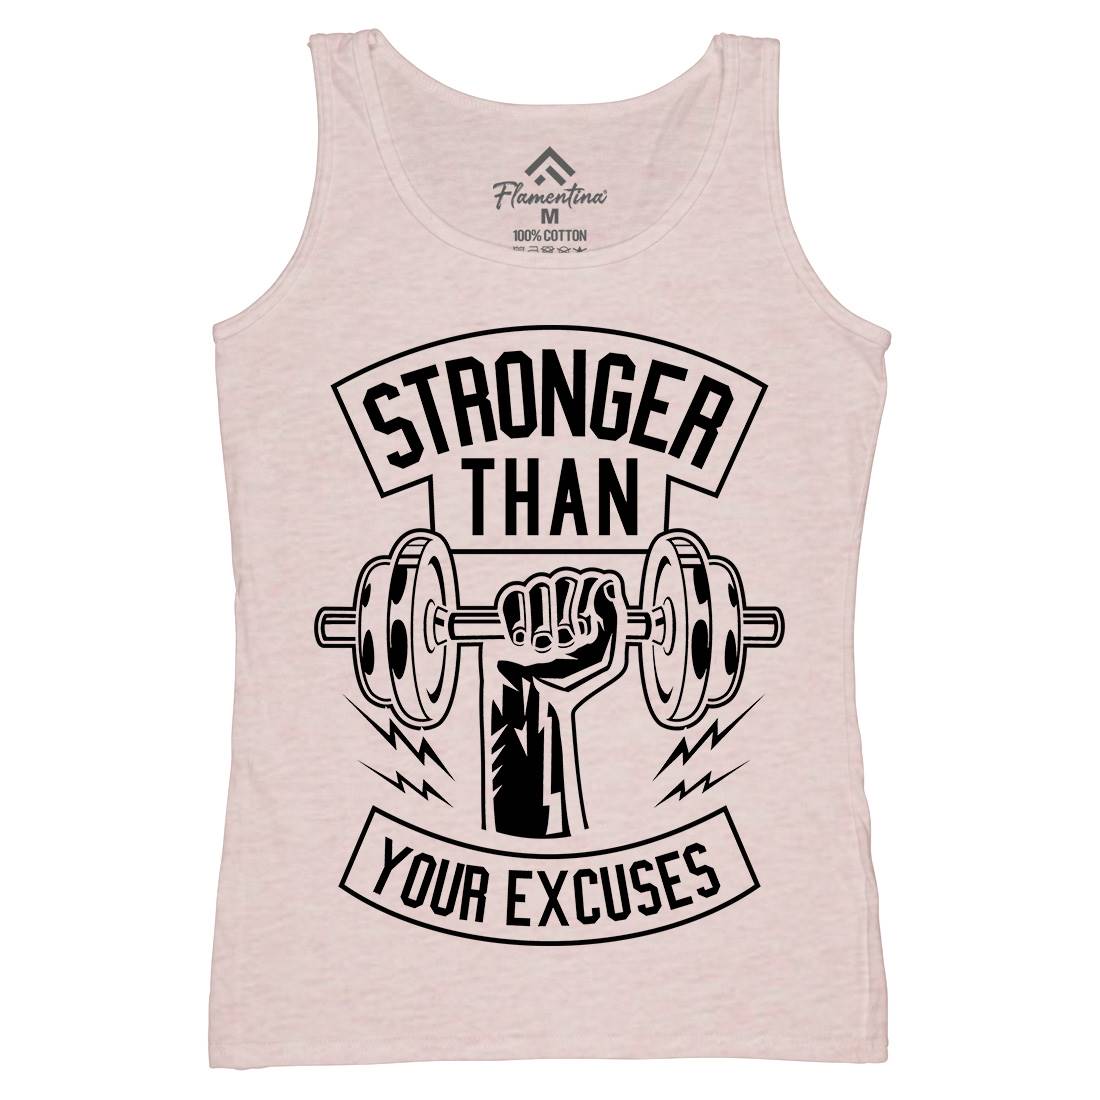 Stronger Than Your Excuses Womens Organic Tank Top Vest Gym B644